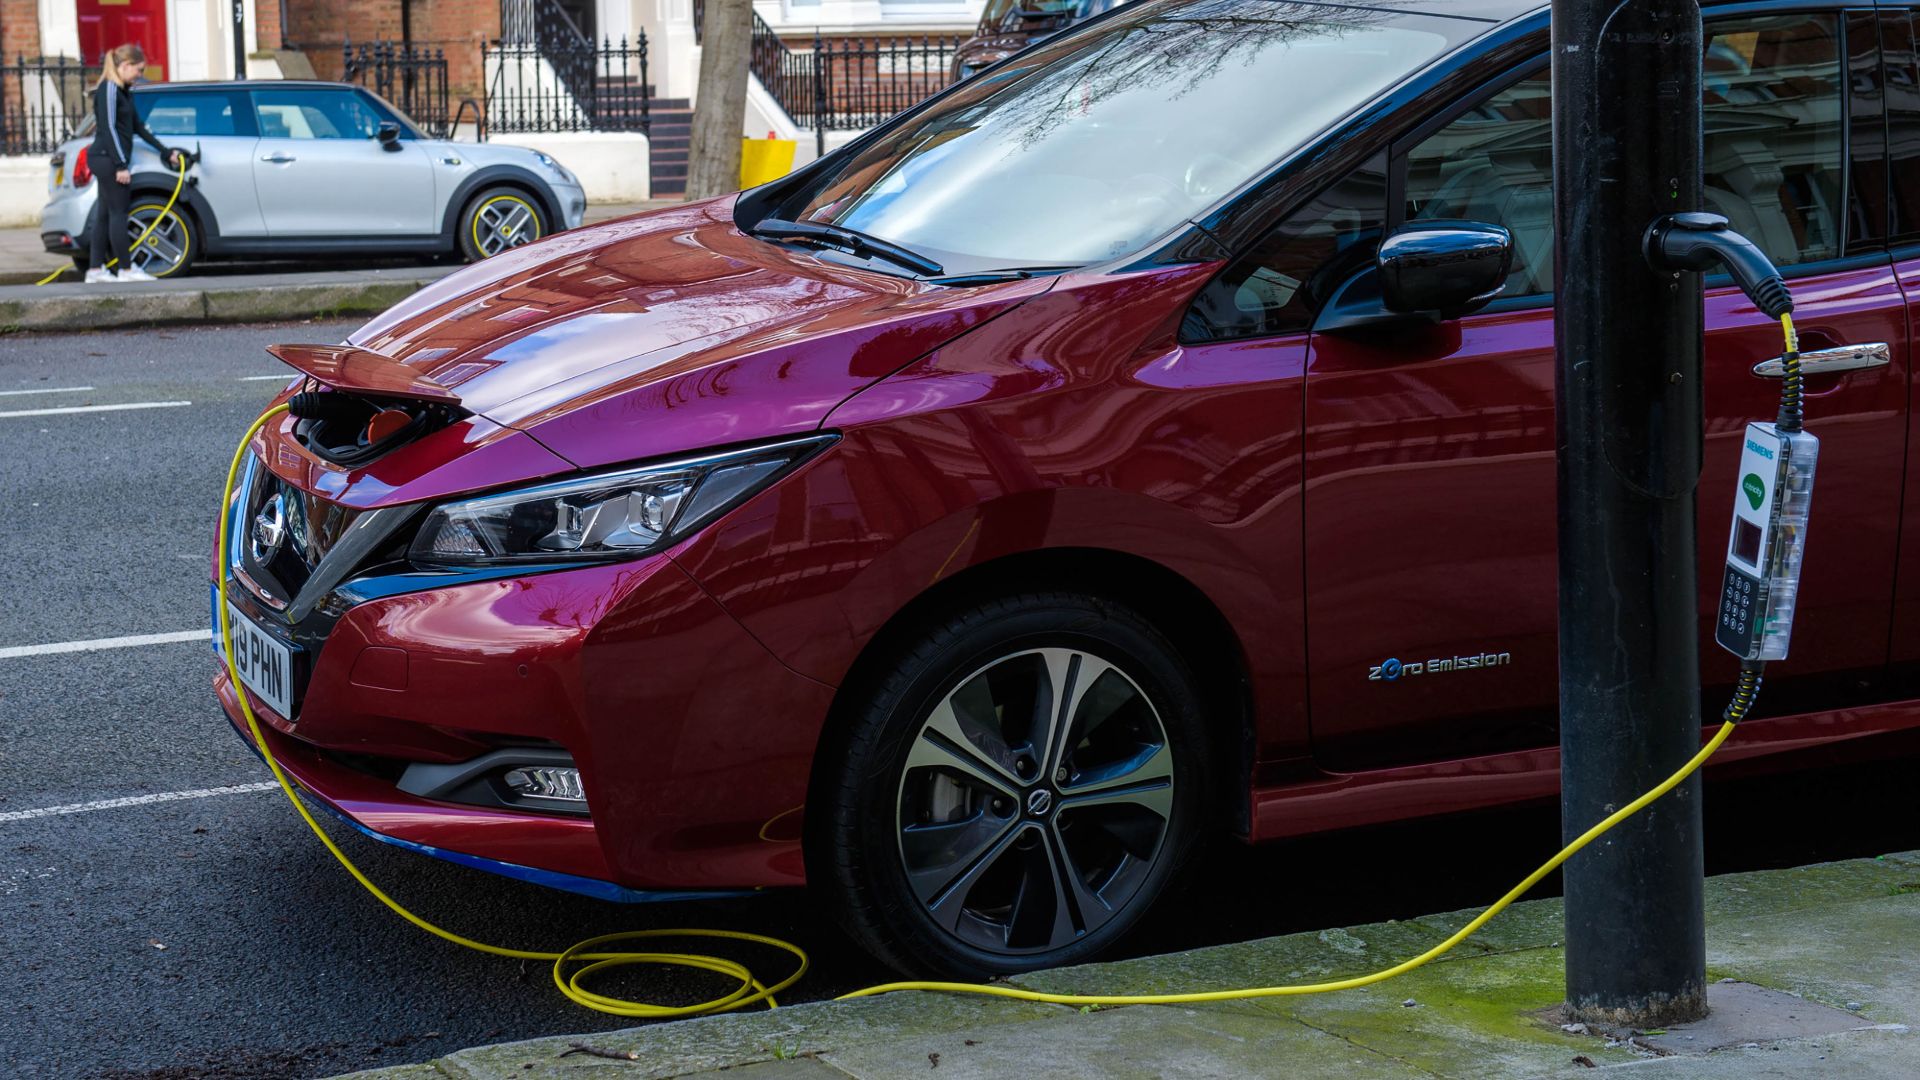 'Electric avenue' opens in london with full street lamp car charging conversion